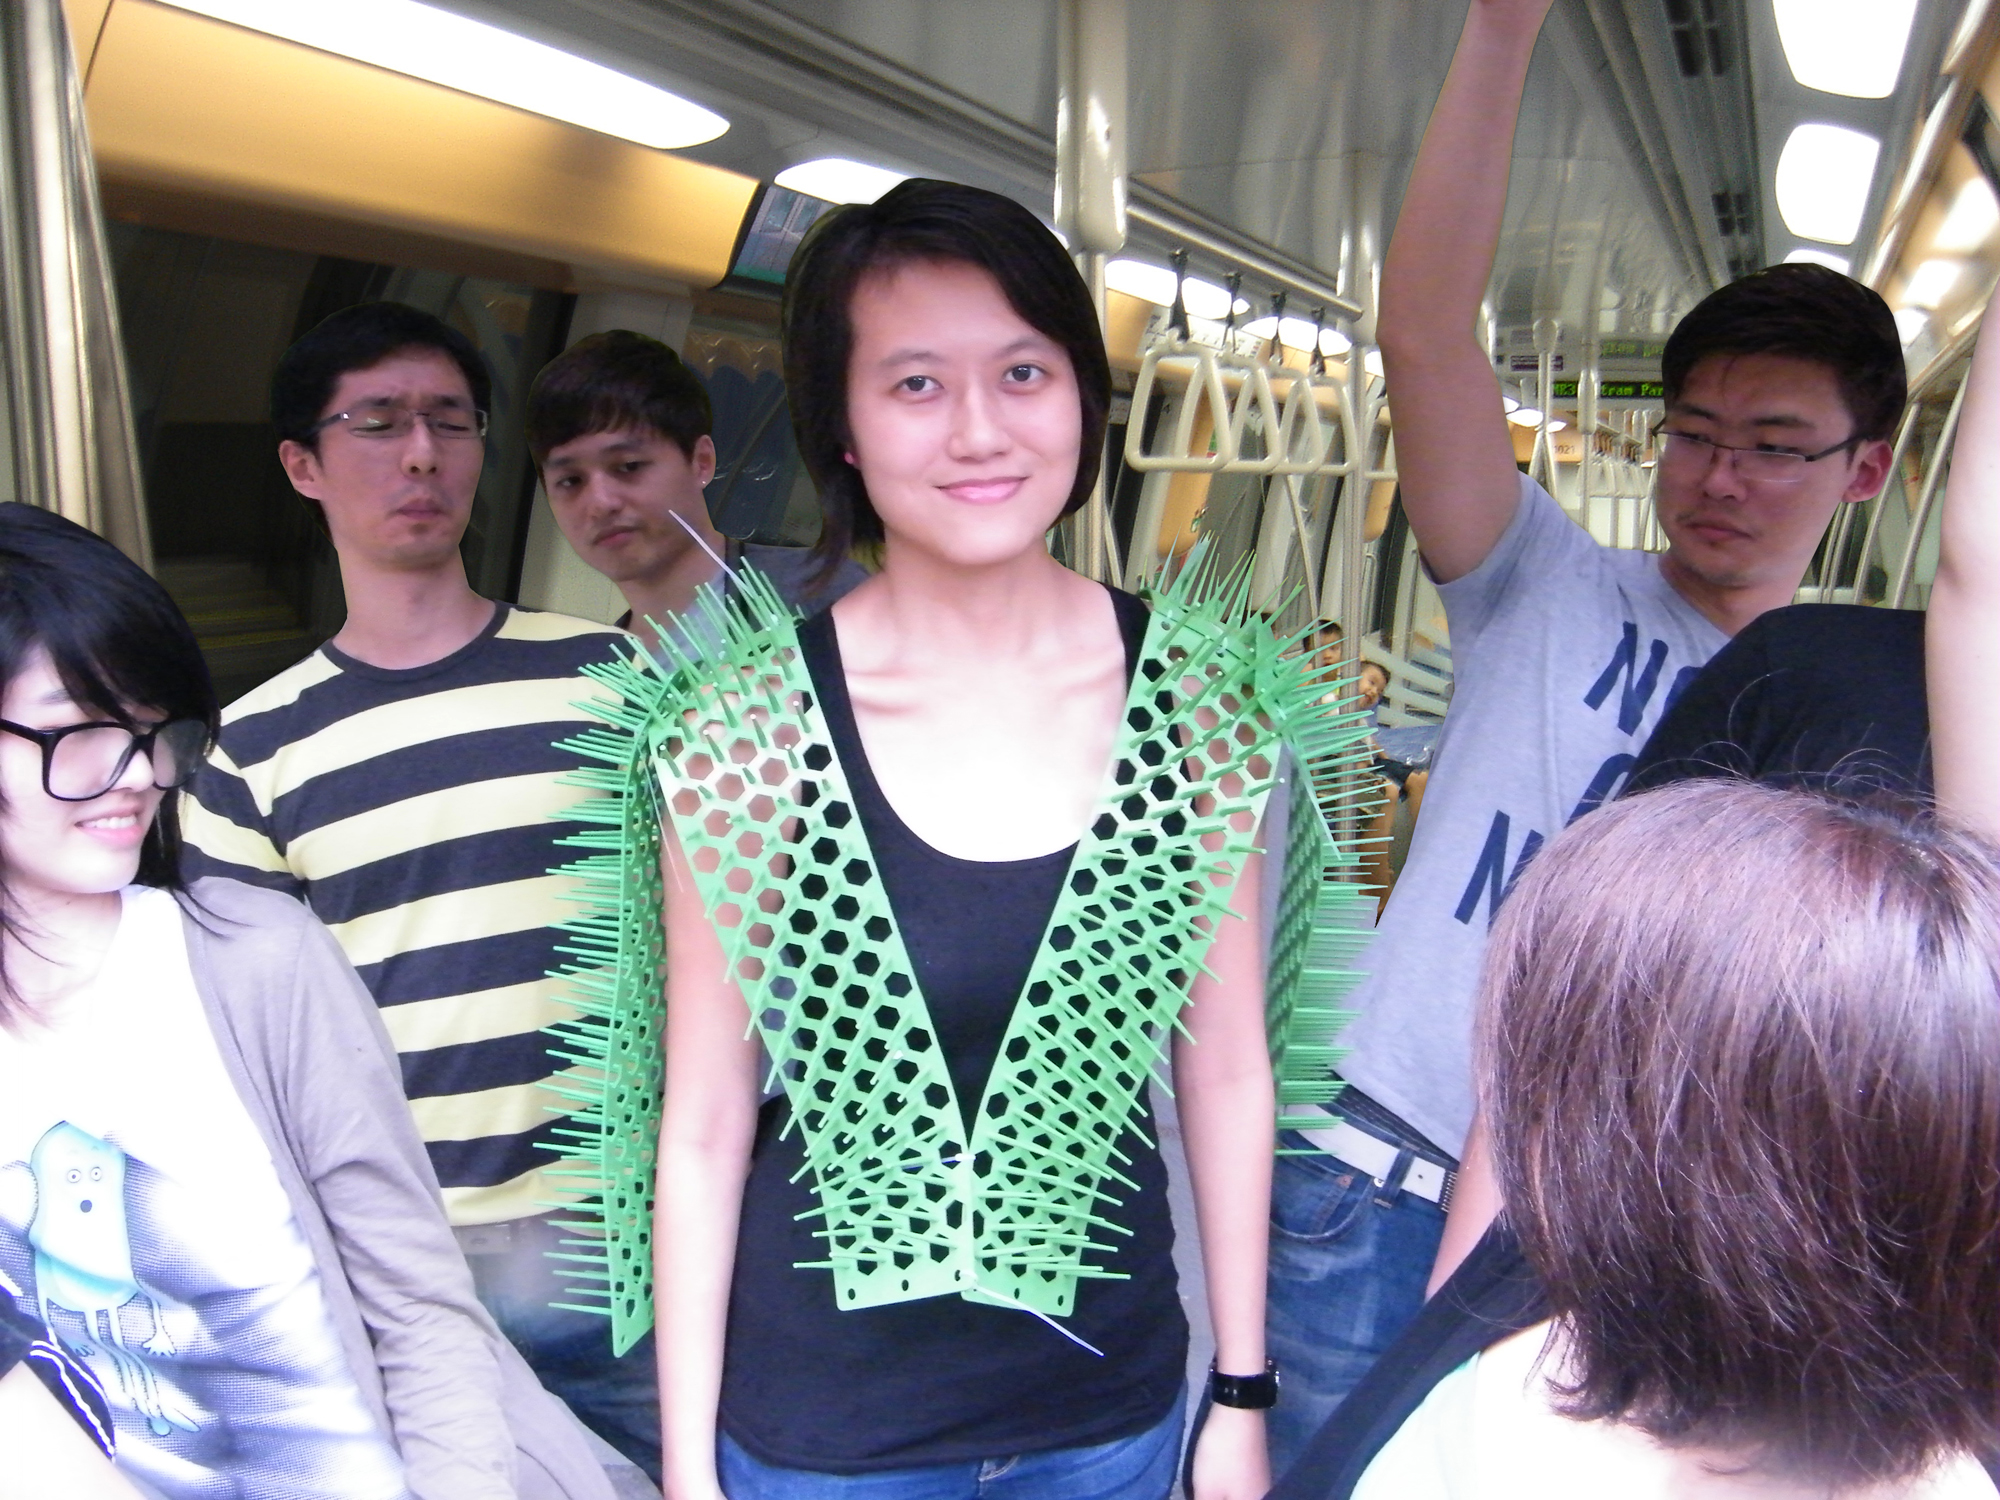 Image of young woman on a subway wearing several strips of plastic spikes across her chest and back; they protrude perhaps 5" off of her body. A group of people around her keep their distance and make grimacing expressions.